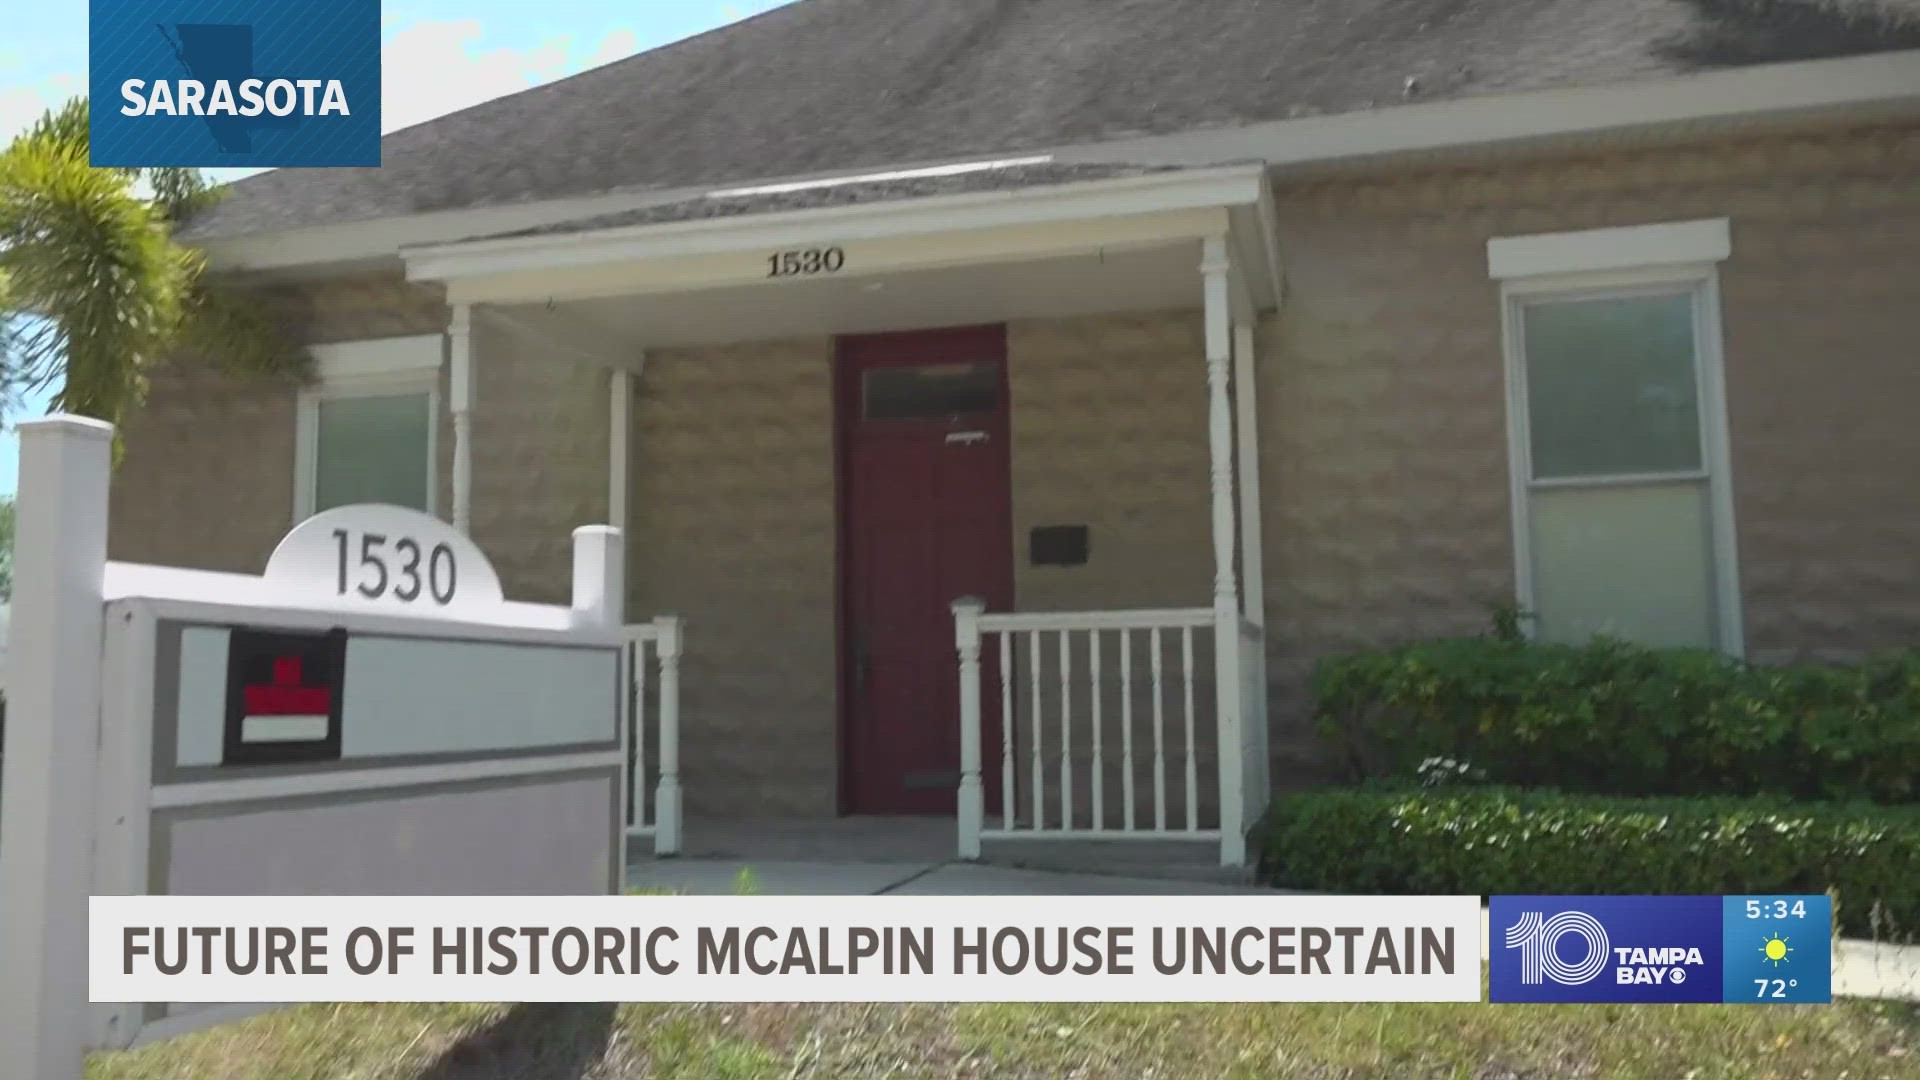 The McAlpin house is among six buildings the Sarasota Alliance for Historic Preservation is trying to save.